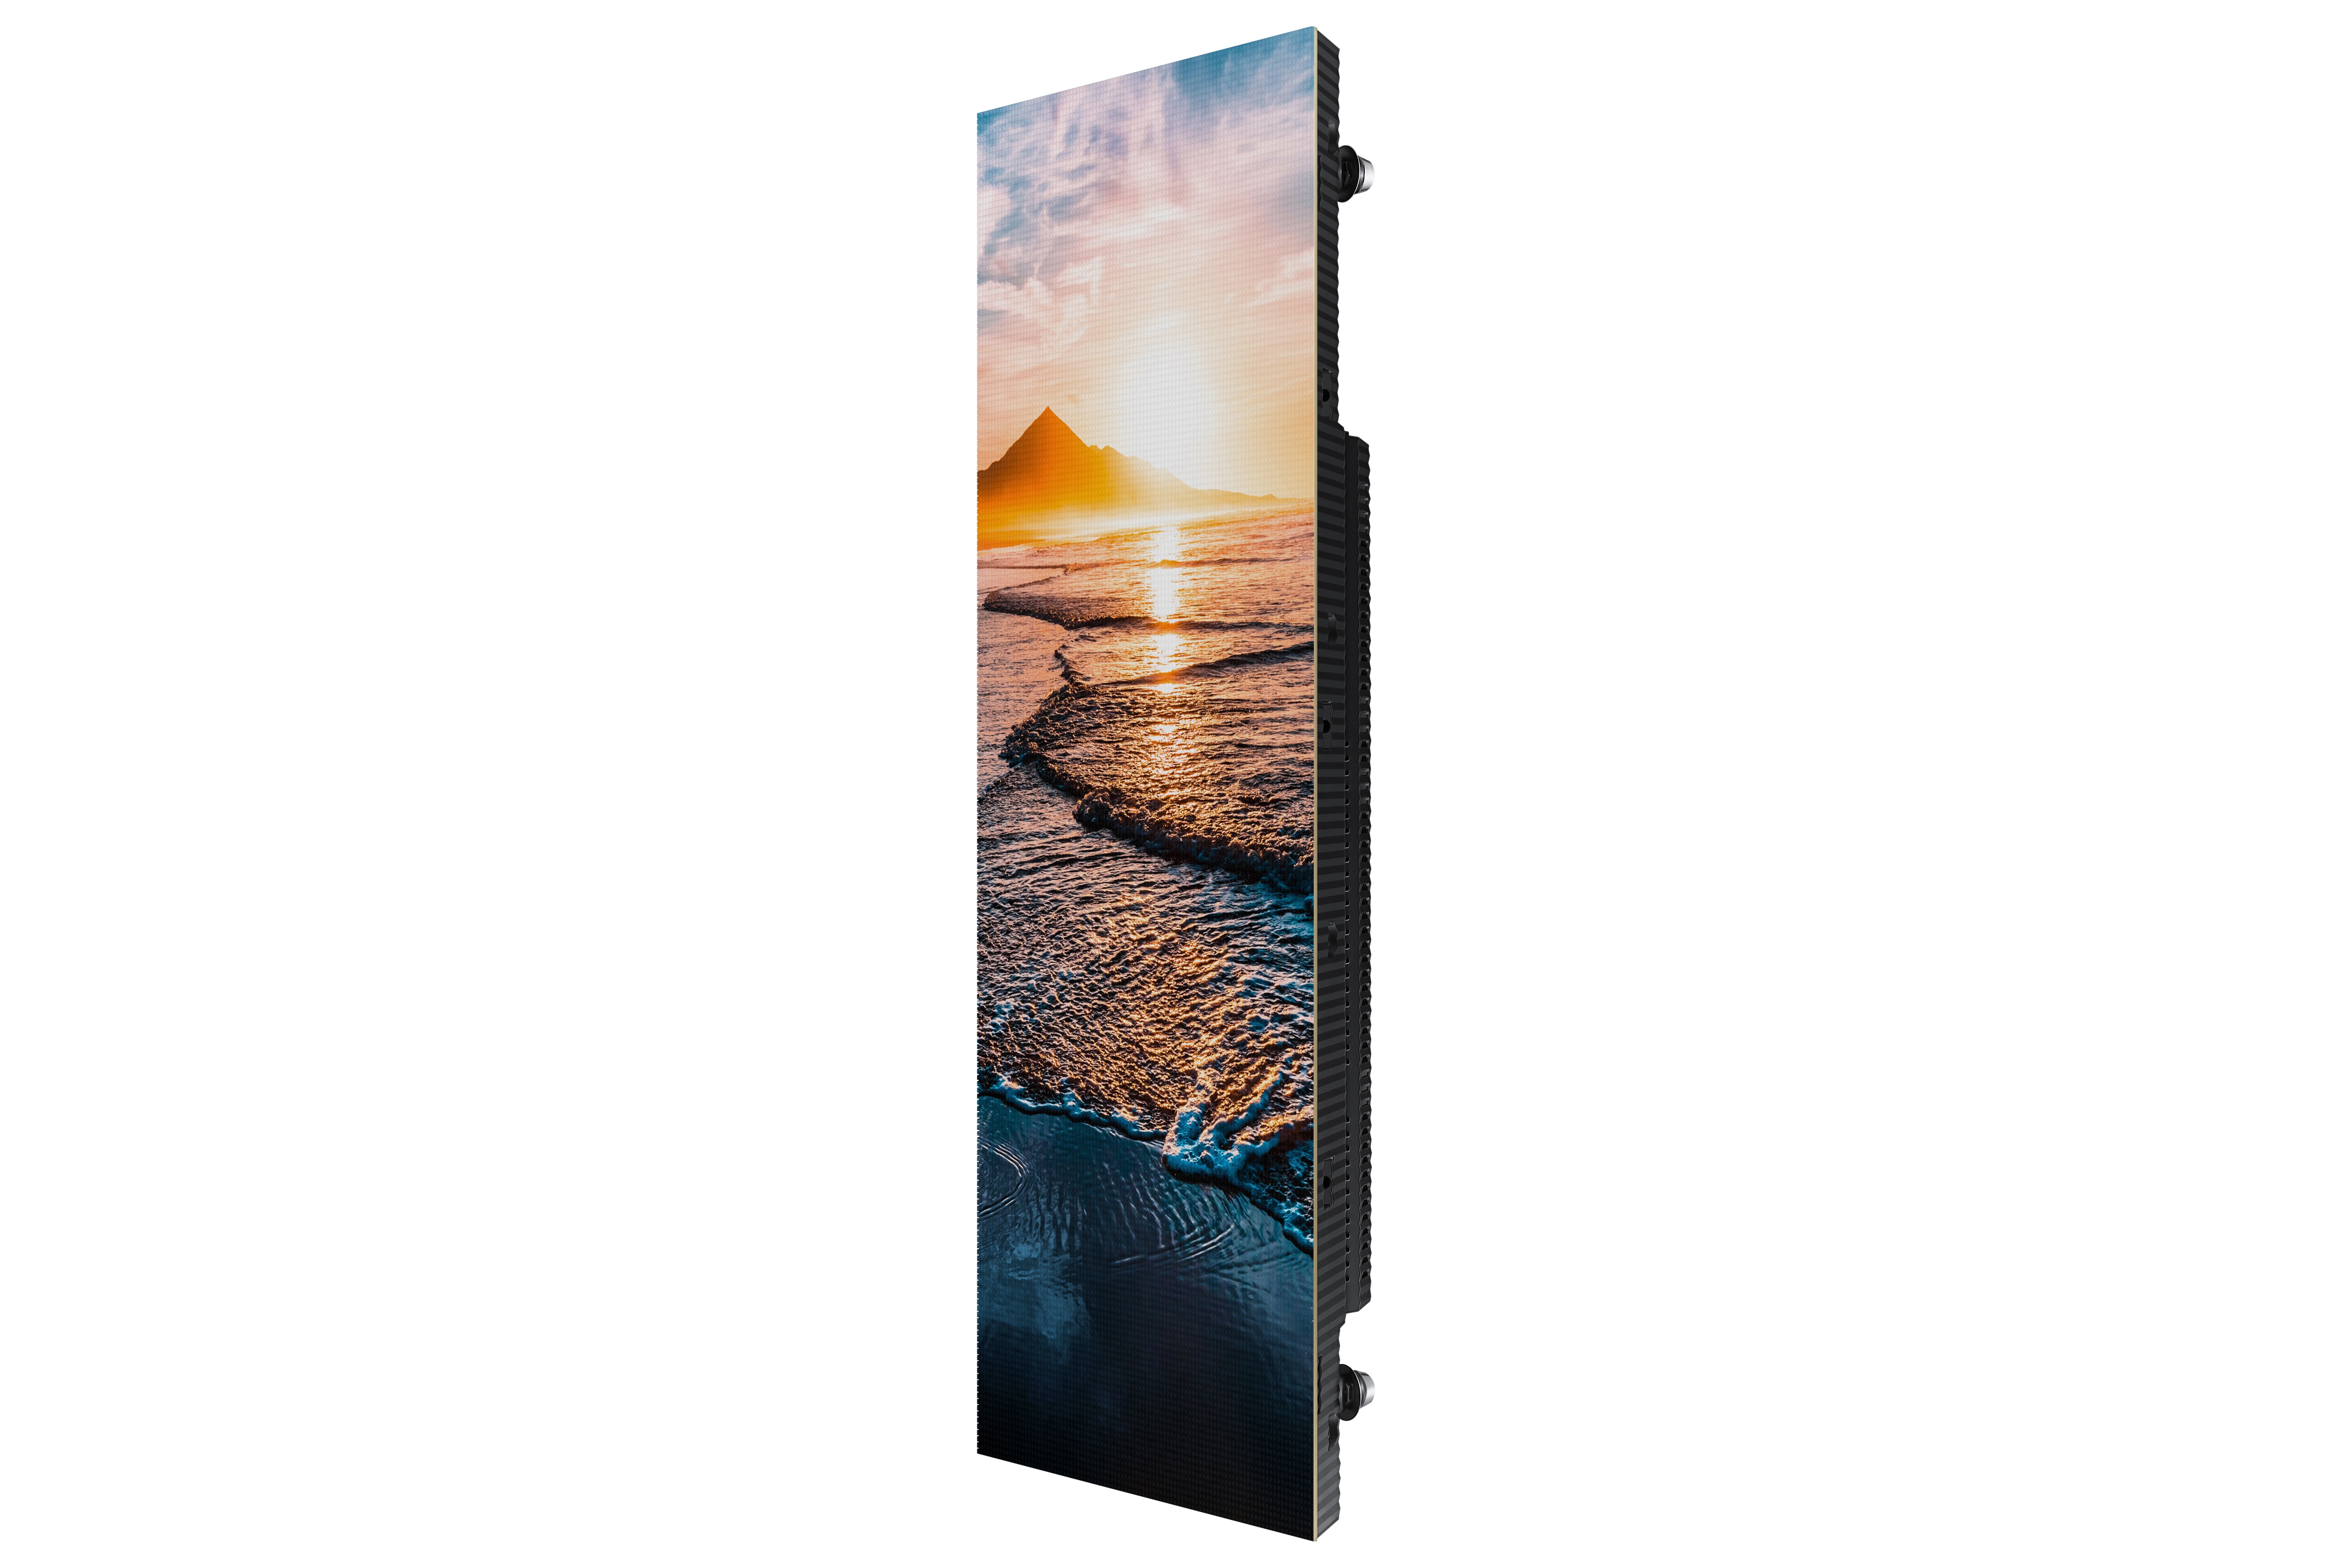 Shop IF Series Direct View LED Displays | Samsung Business